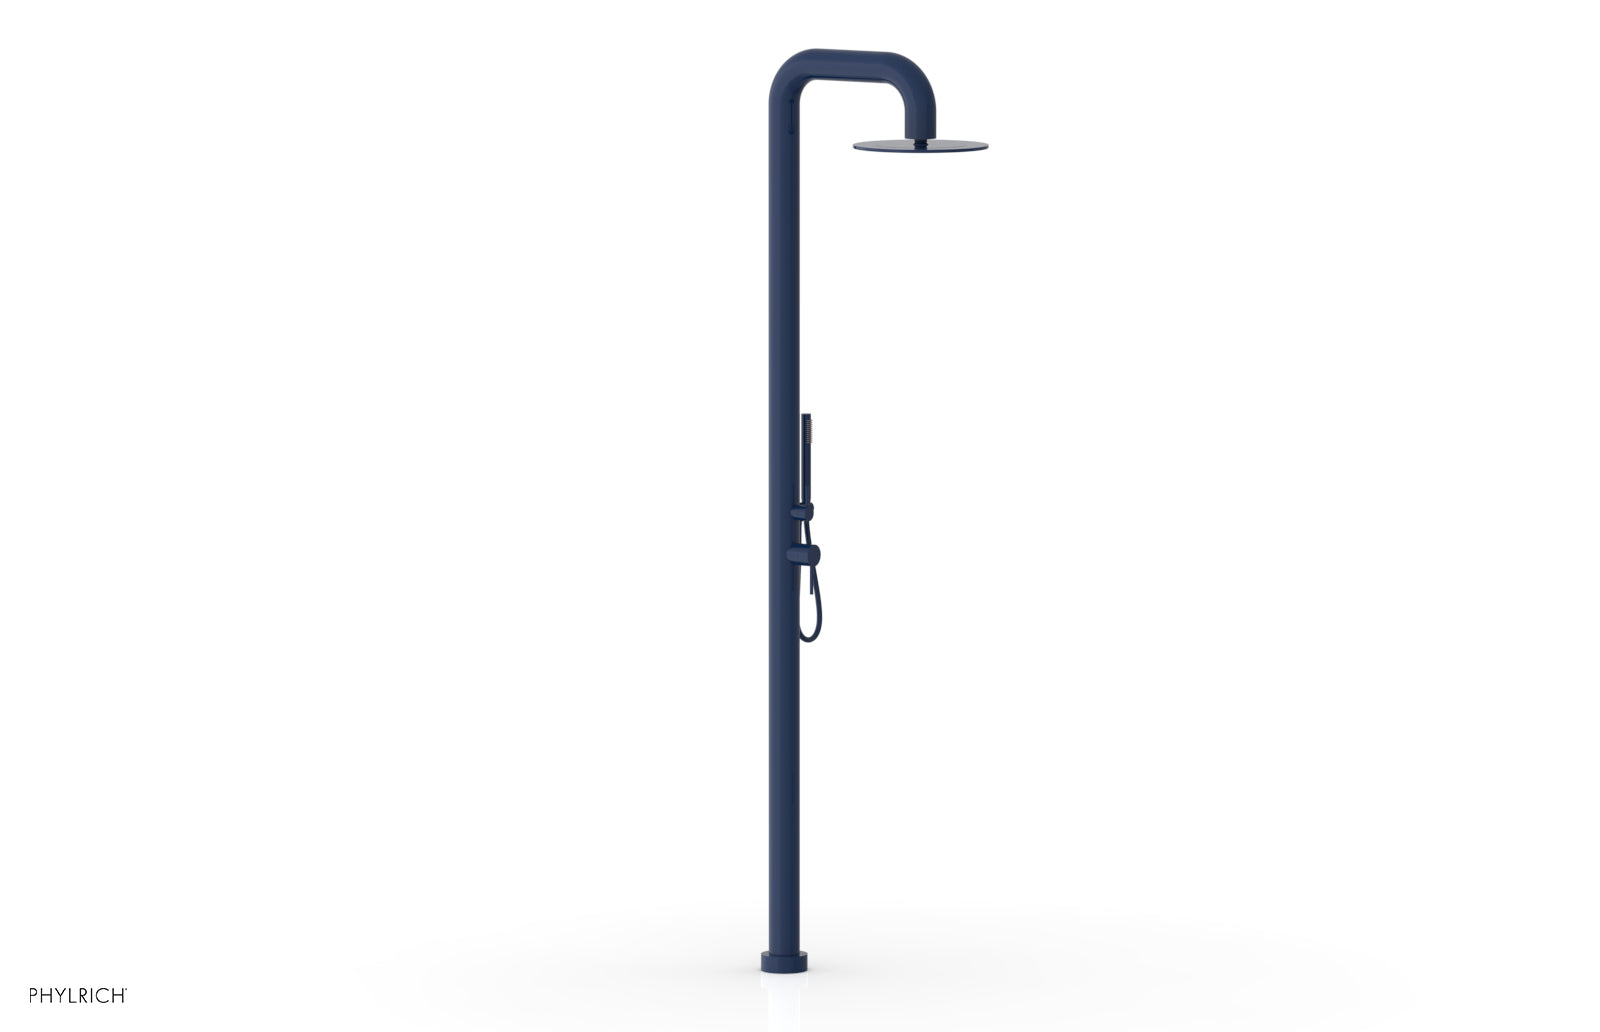 Phylrich OUTDOOR SHOWER Pressure Balance Shower with 12" Rain Head and Hand Shower